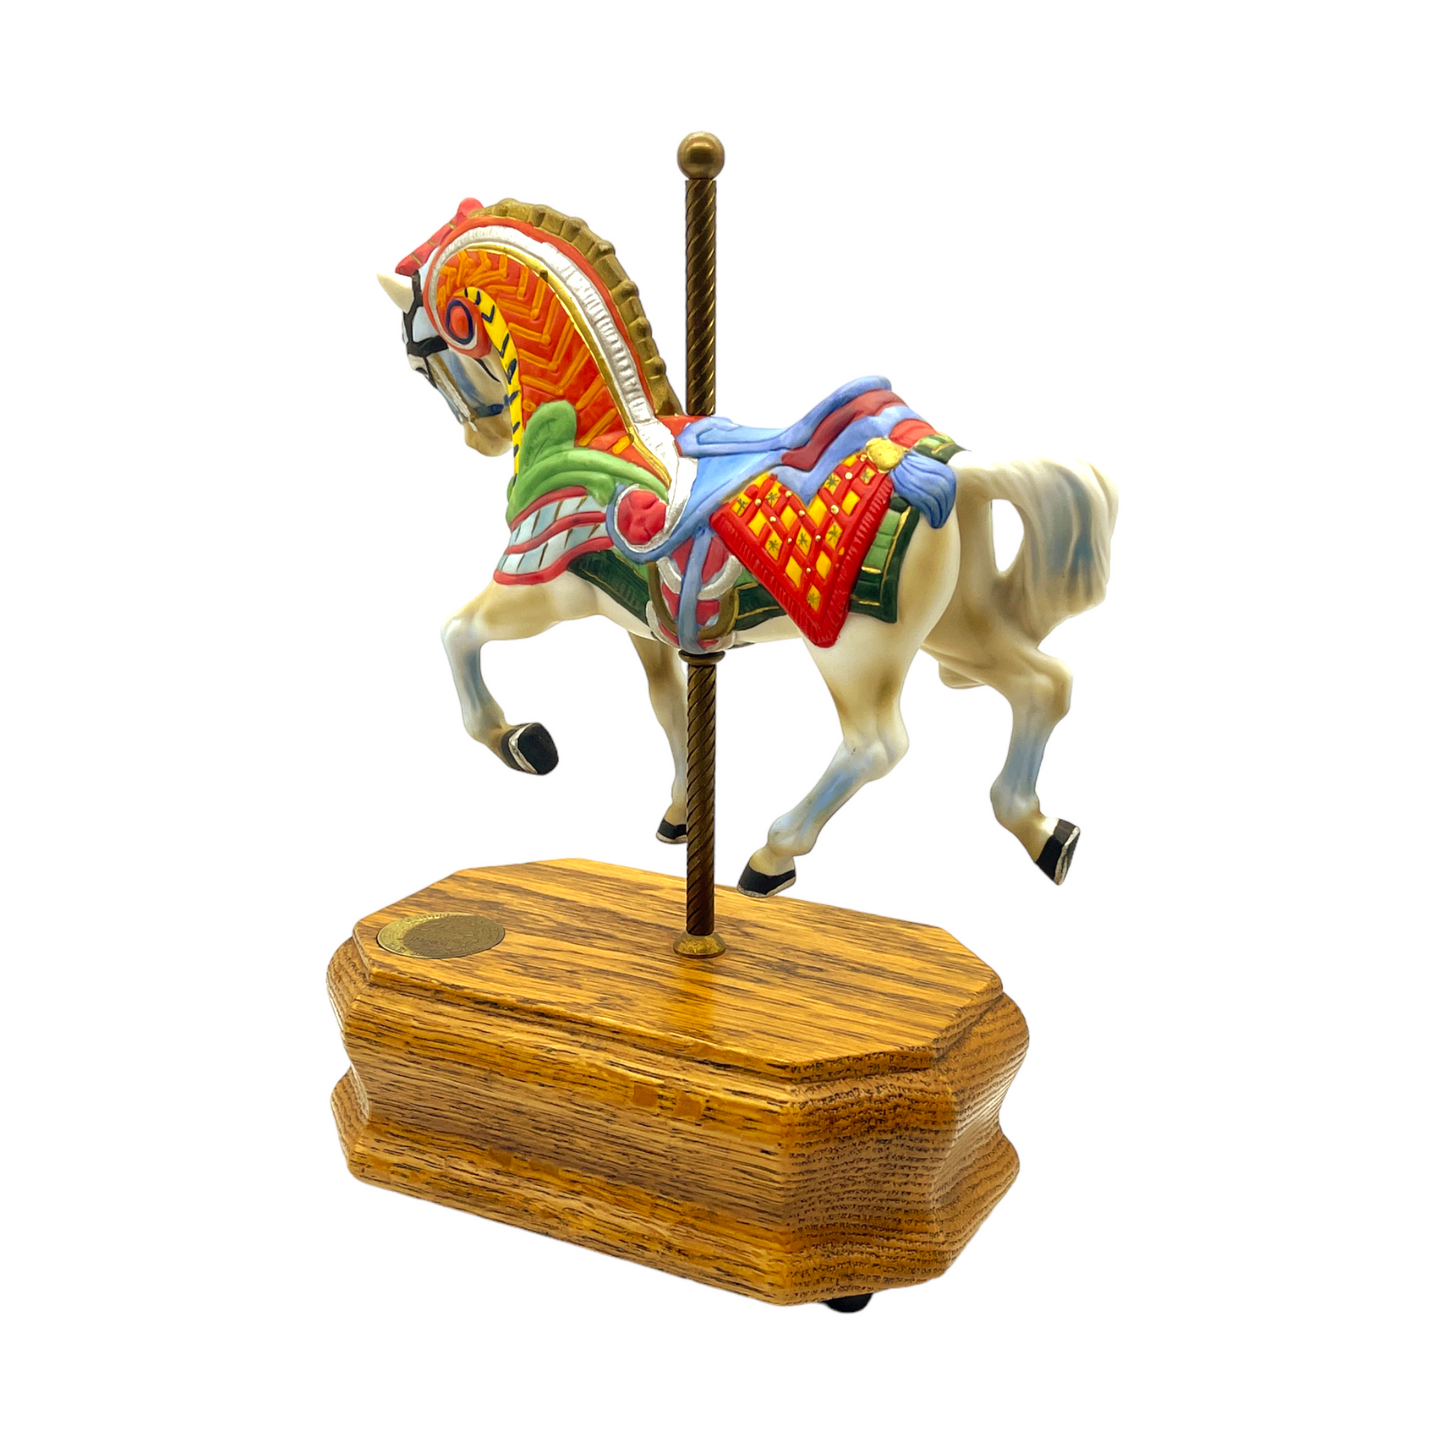 Willett's Carousel Memories - Americana Collection - Horse Music Box #177 of 9500 - 9"